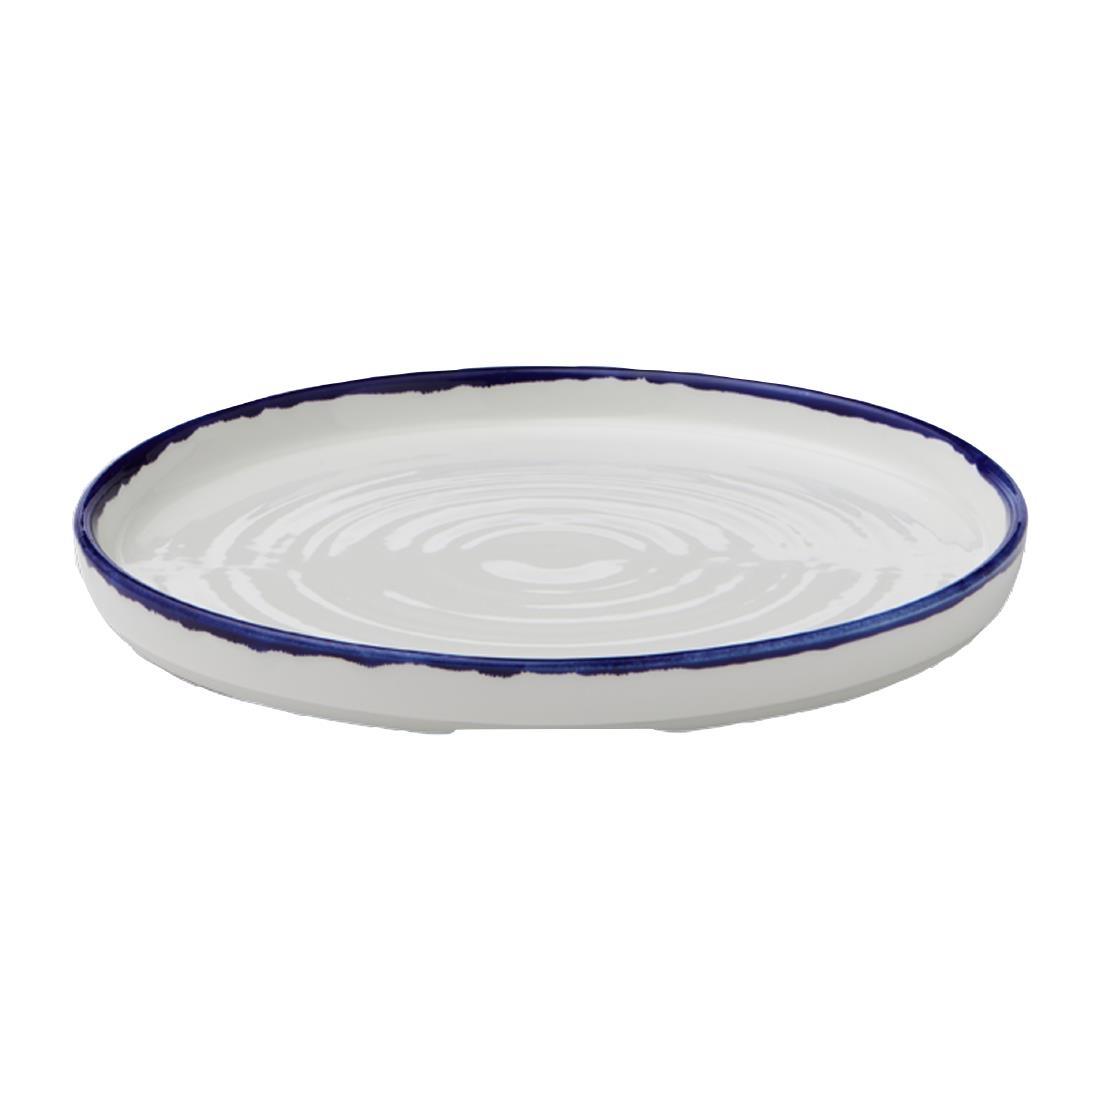 Dudson Harvest Walled Plates Ink 210mm (Pack of 6) - FX152  - 2